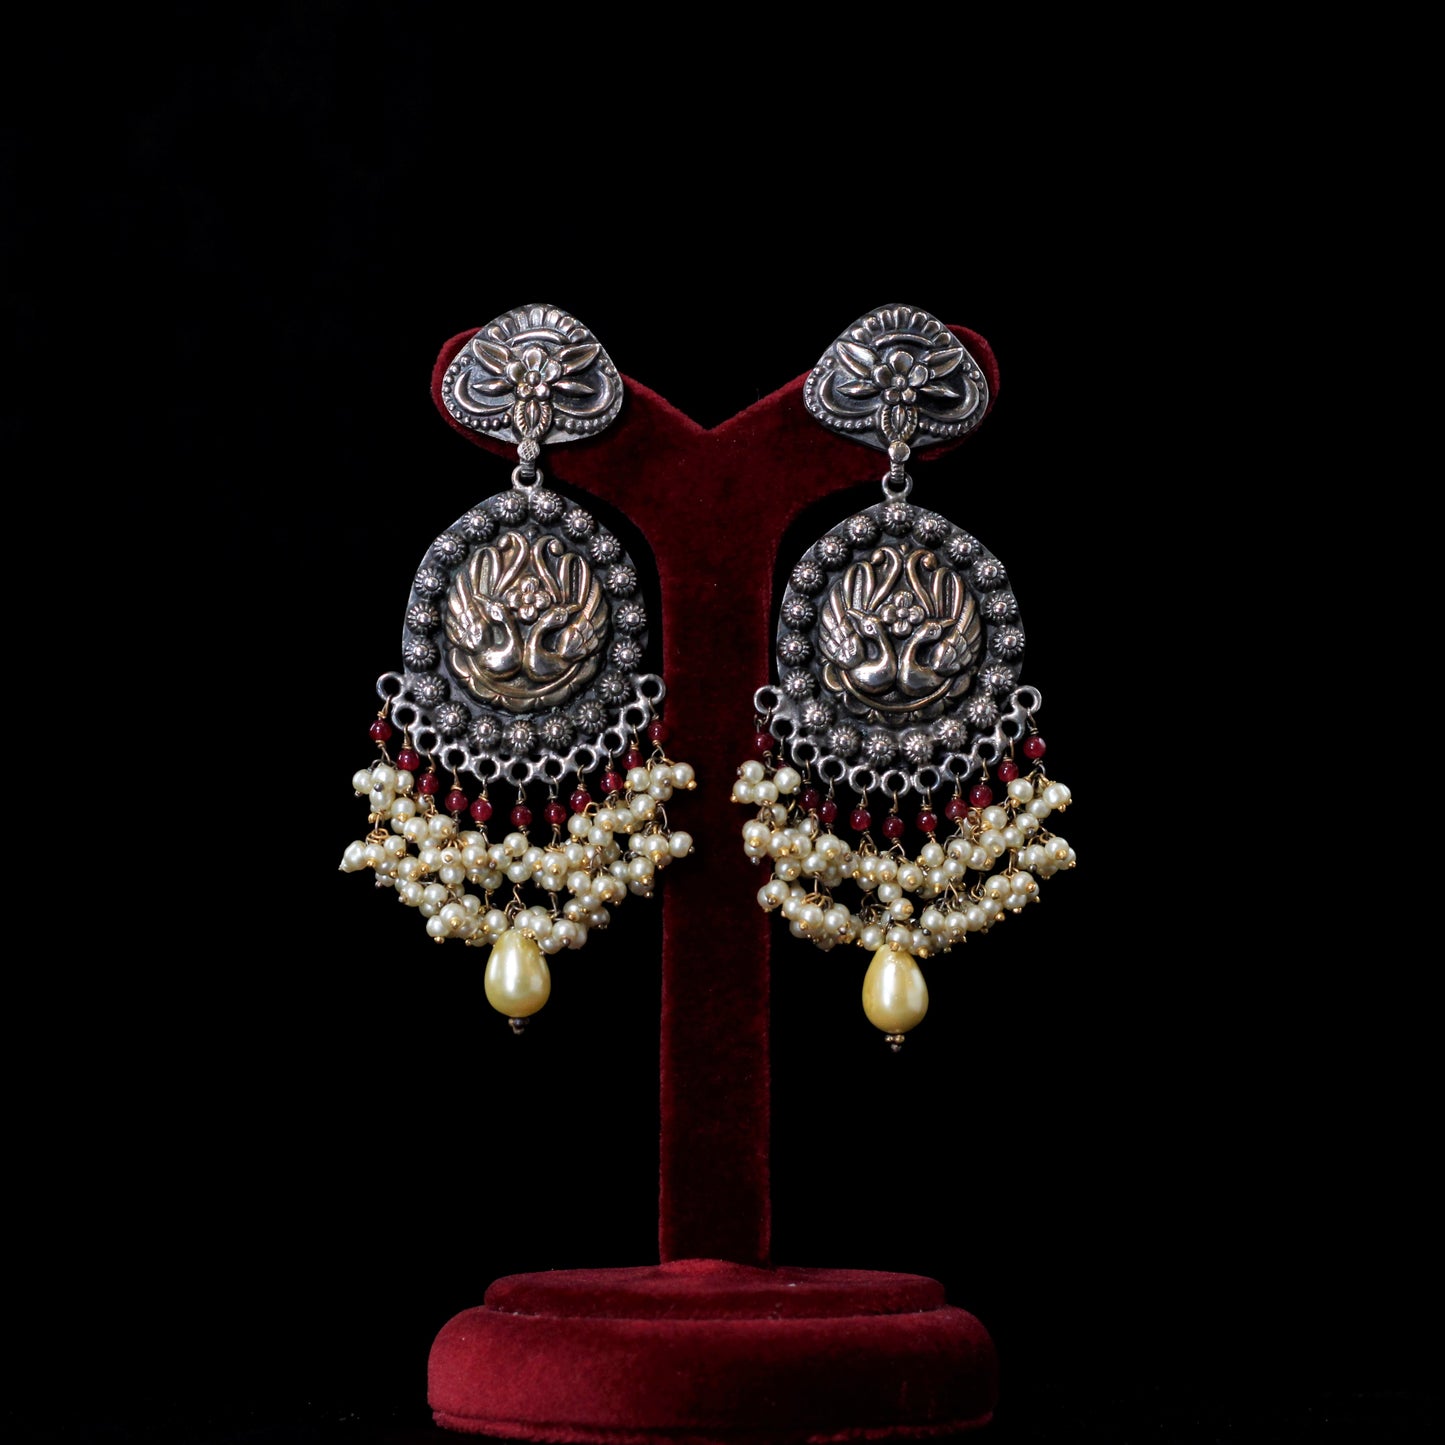 TWO-TONE EARRINGS :- 92.5 STERLING SILVER WITH RED ONYX & FRESH WATER PEARLS.